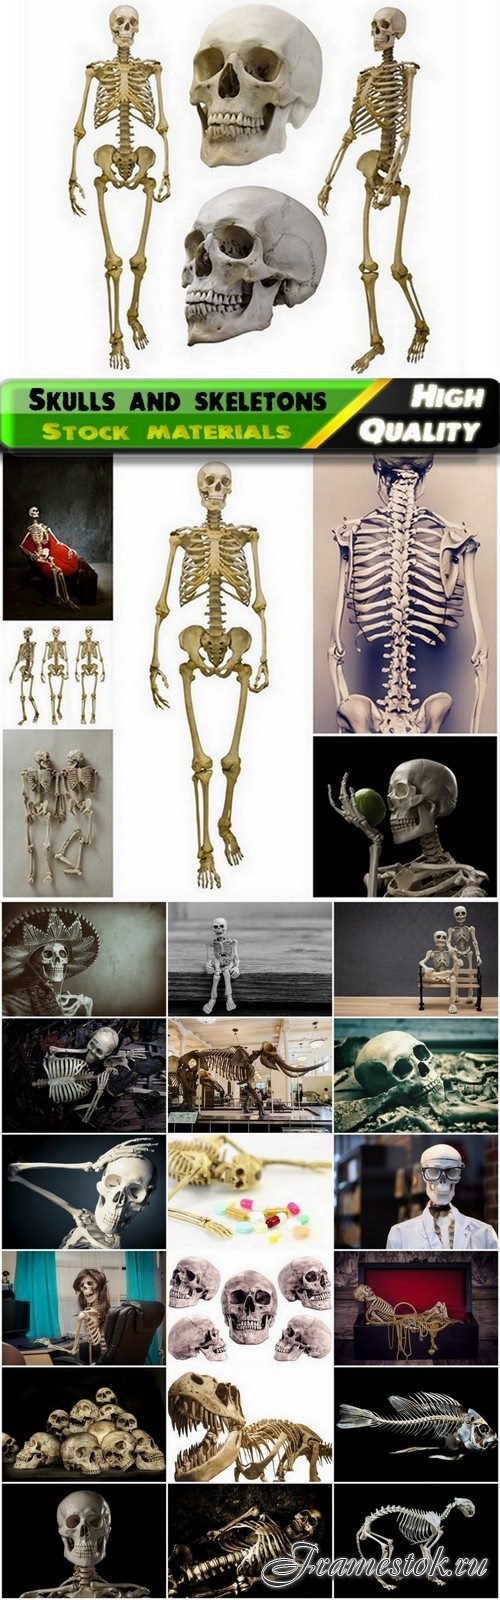 Scary skulls and skeletons of people and animals - 25 HQ Jpg